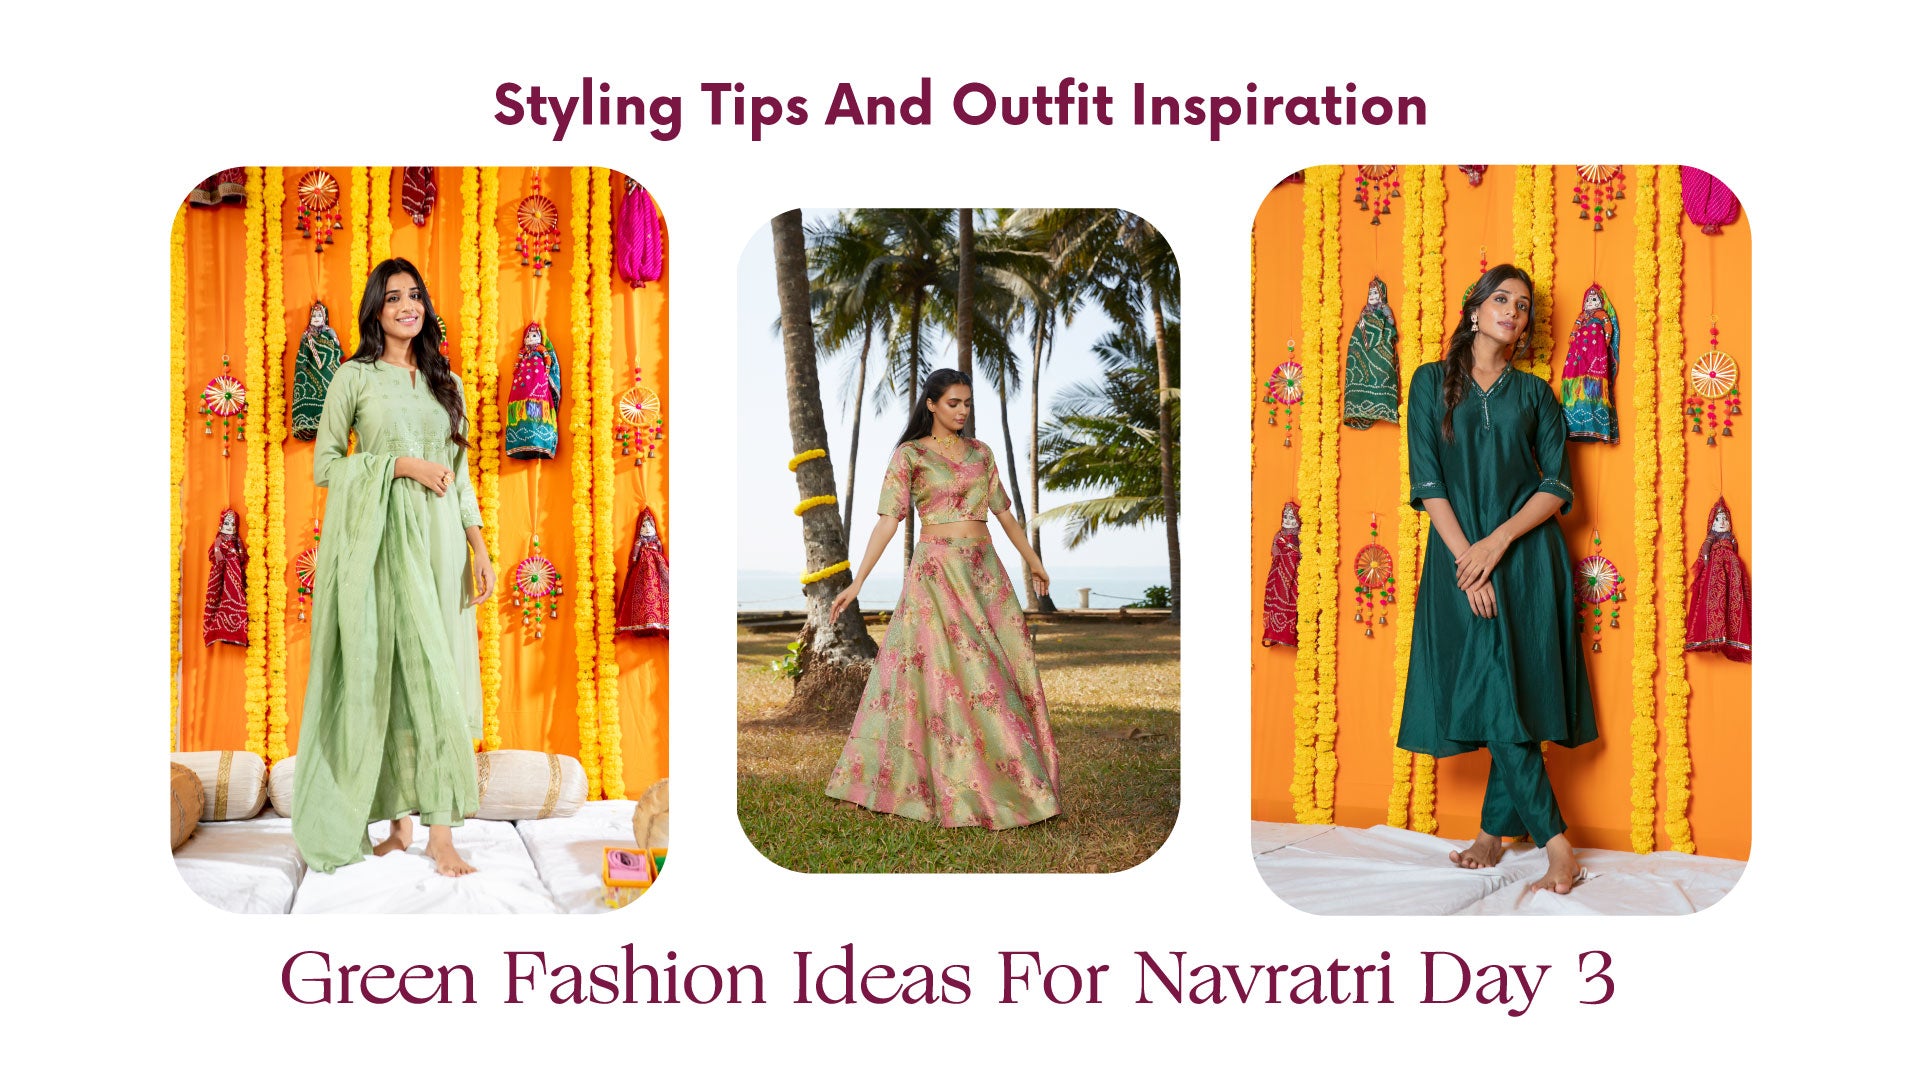 Green Fashion Ideas For Navratri Day 3: Styling Tips And Outfit Inspiration